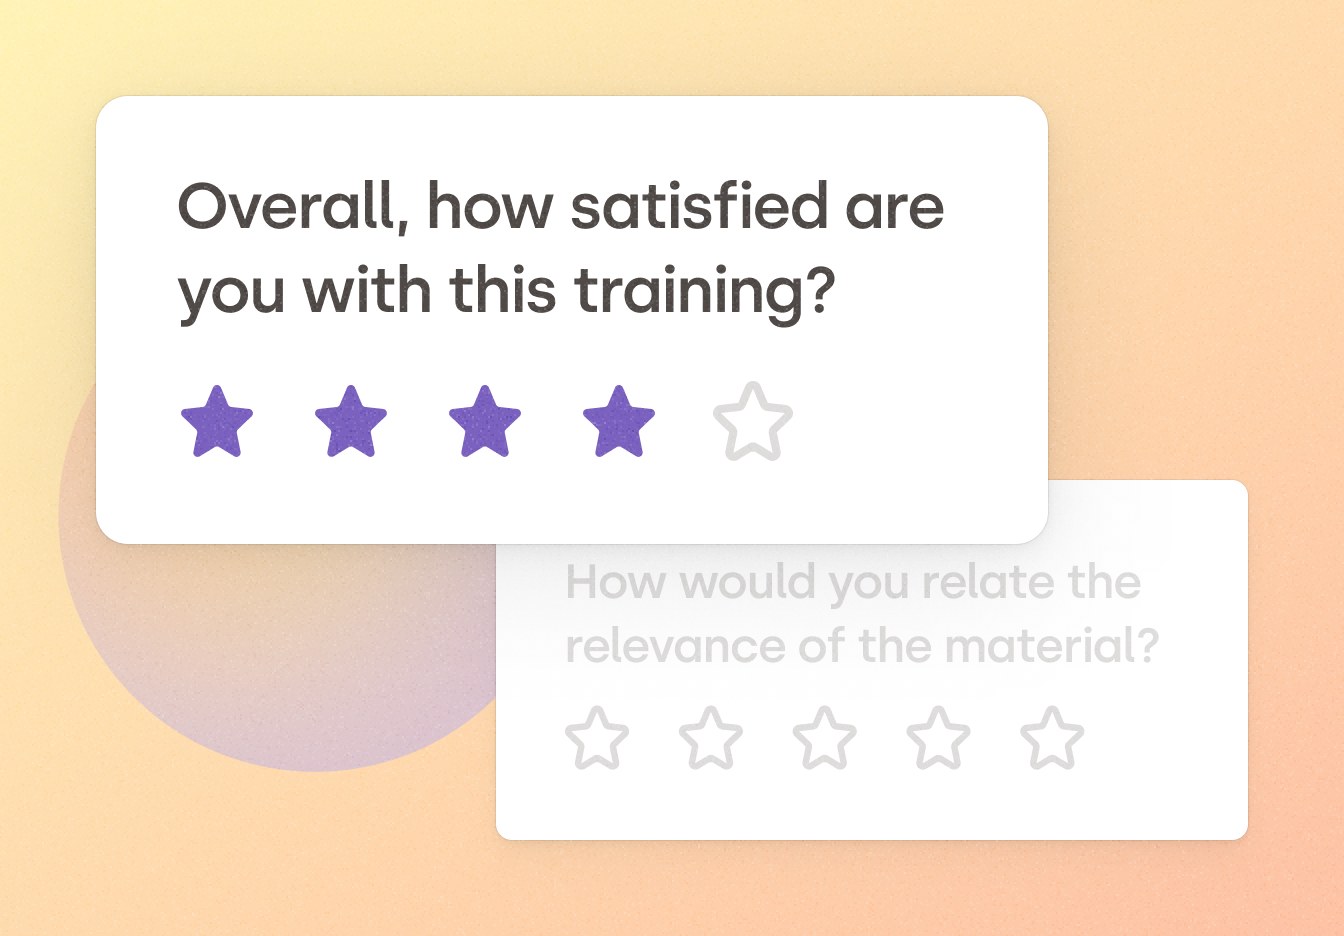 A card showing one question 'Overall, how satisfied are you with this training?' and a 5-star scale showing a 4-star rating.